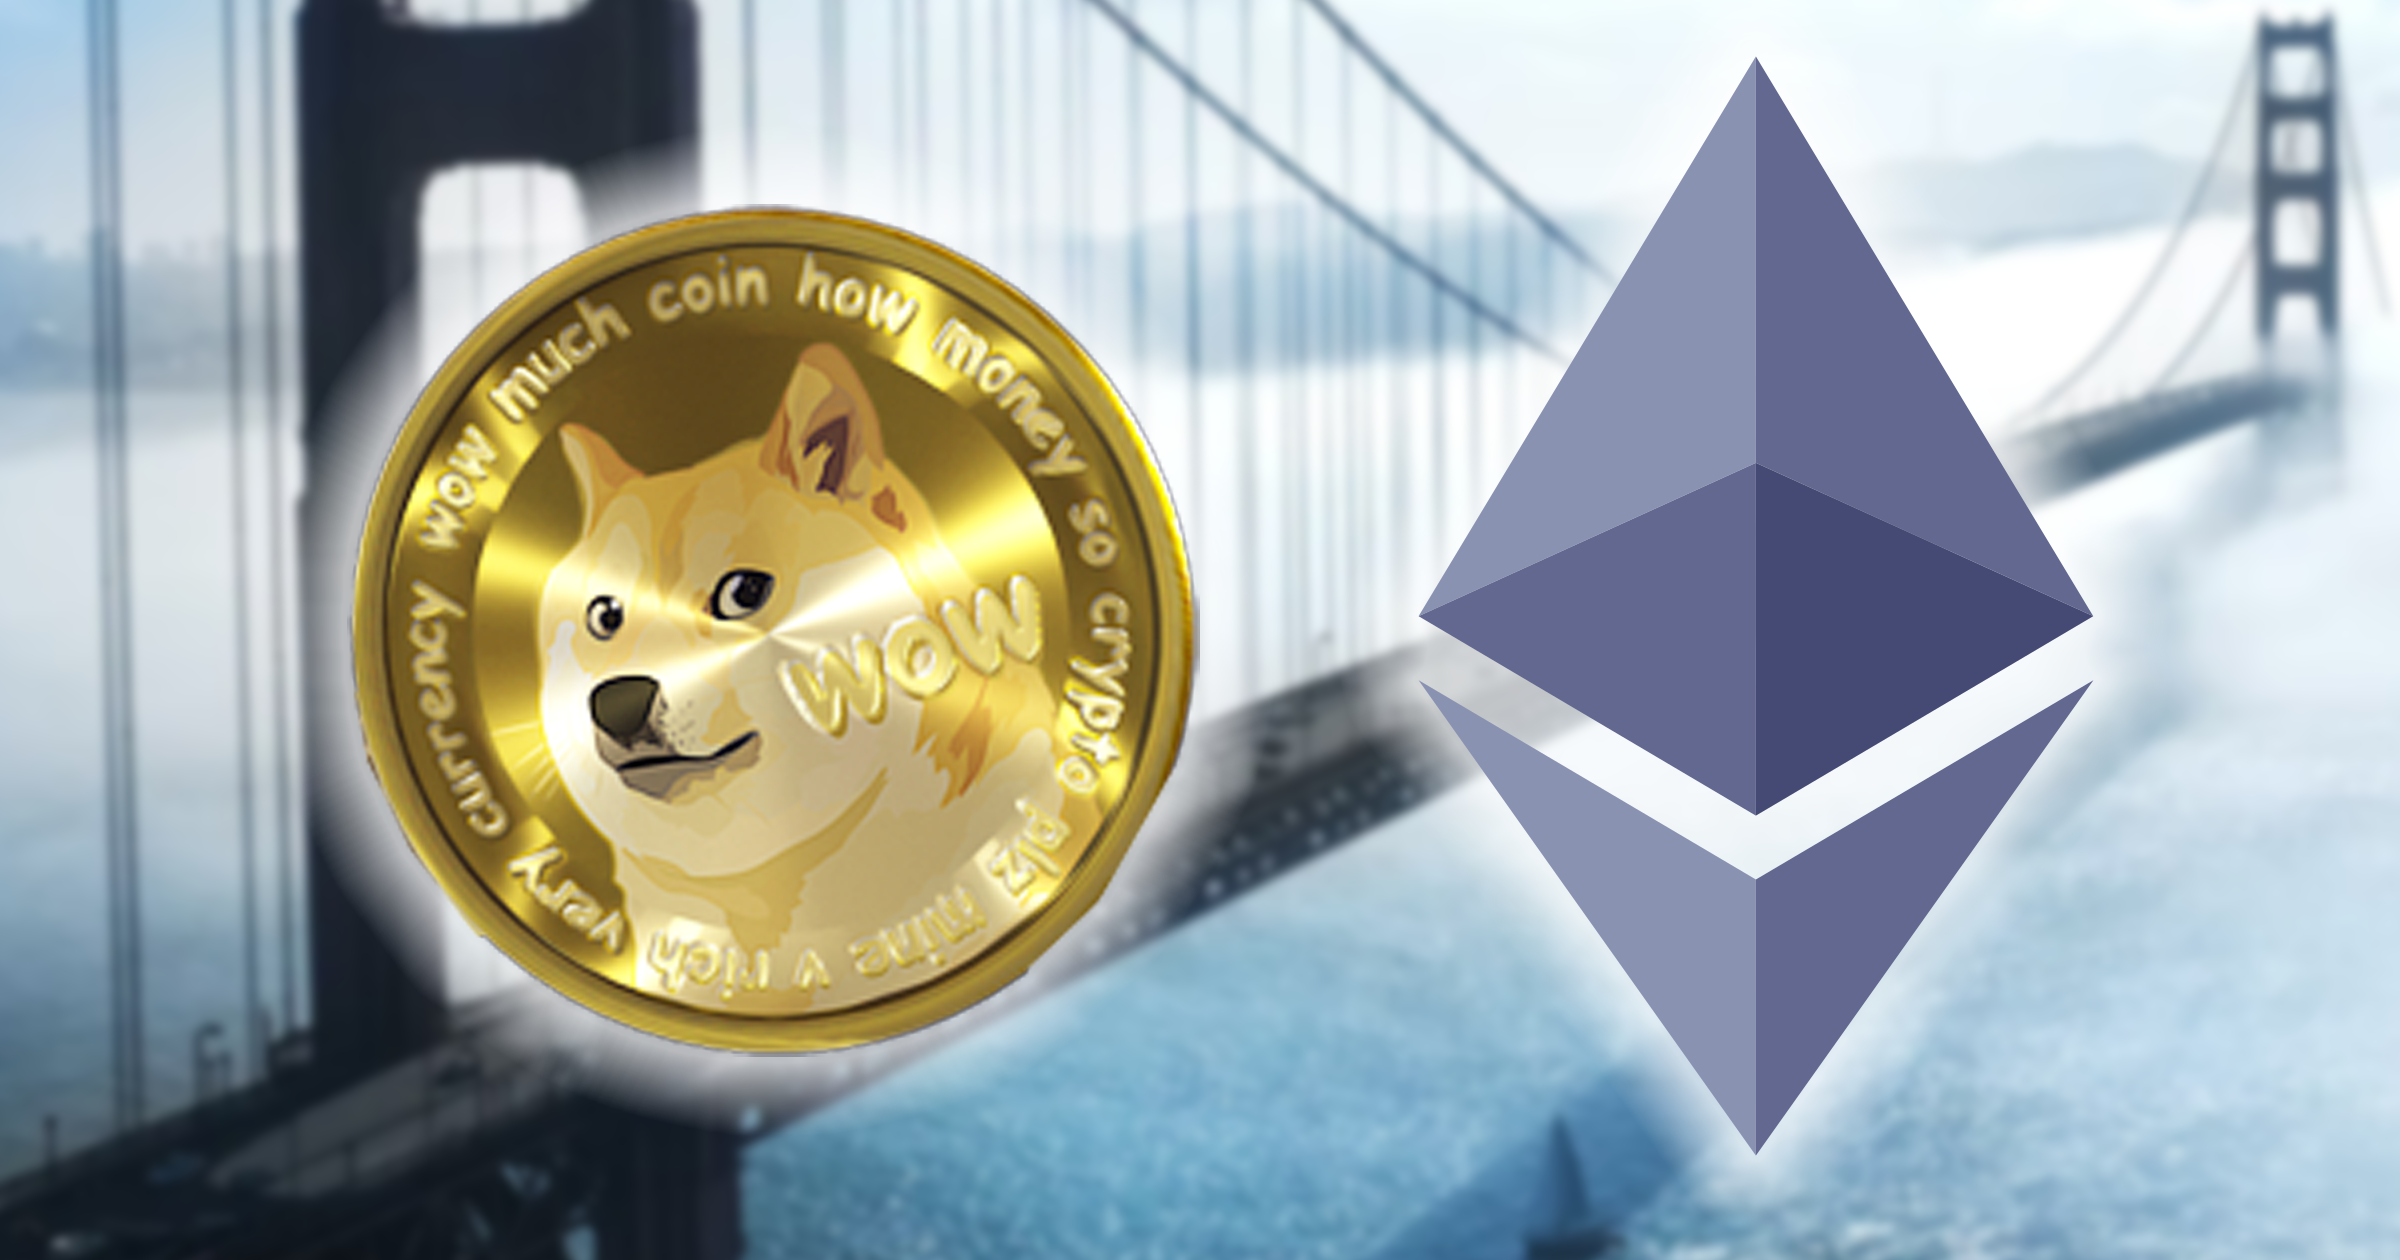 Dogecoin-Ethereum Bridge Expected to Go Live in 